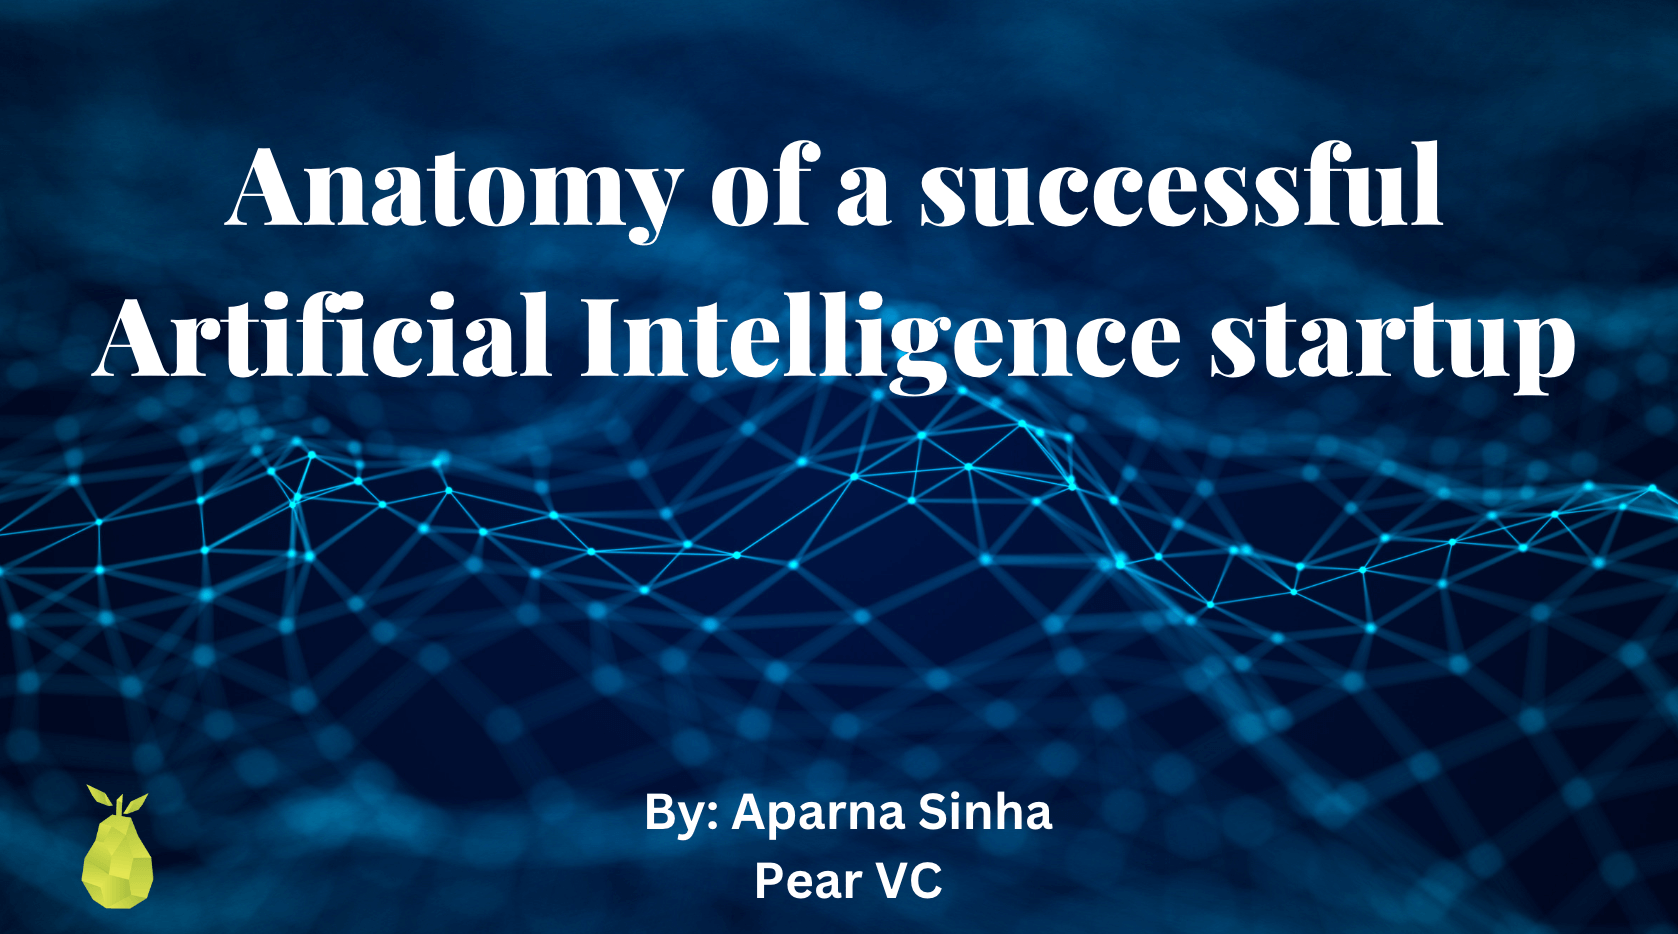 resources Anatomy of a successful Artificial Intelligence startup